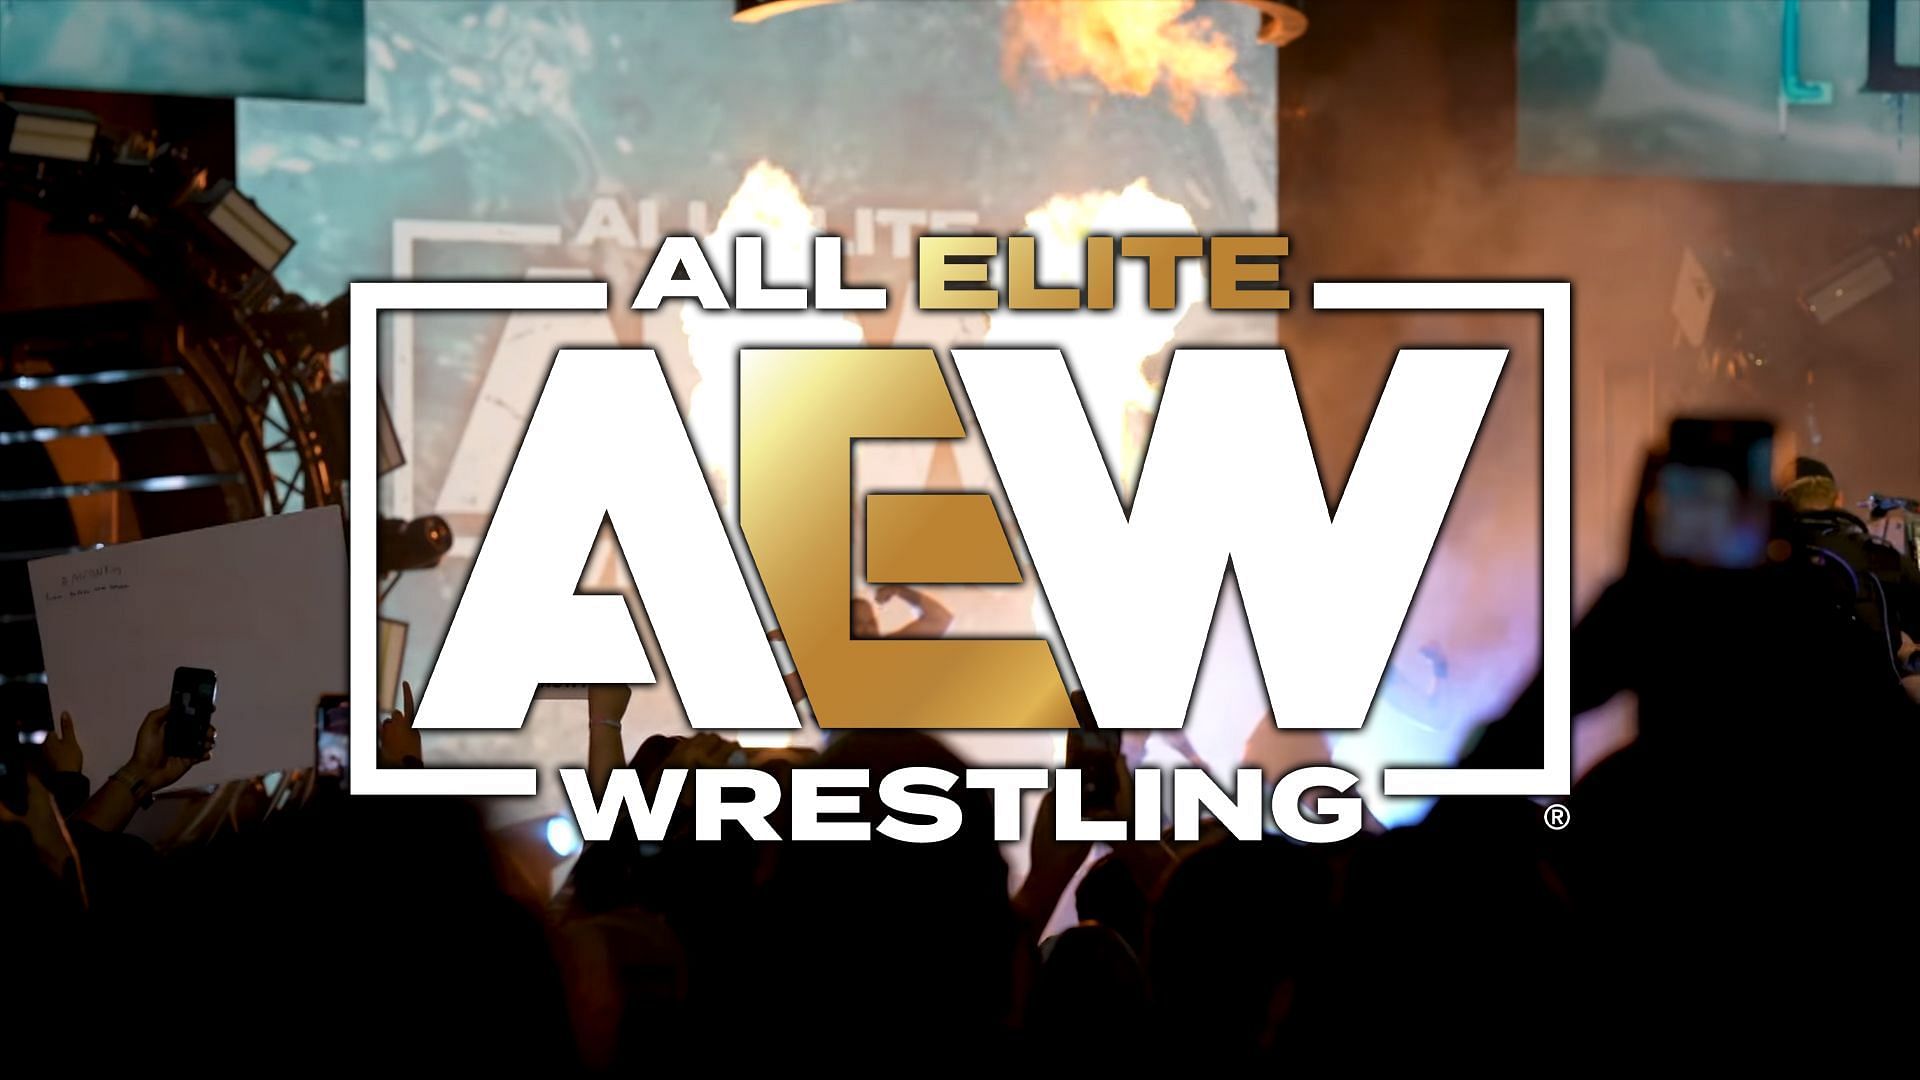 AEW seems to have parted ways with a prominent talent (image credits: All Elite Wrestling on YouTube)